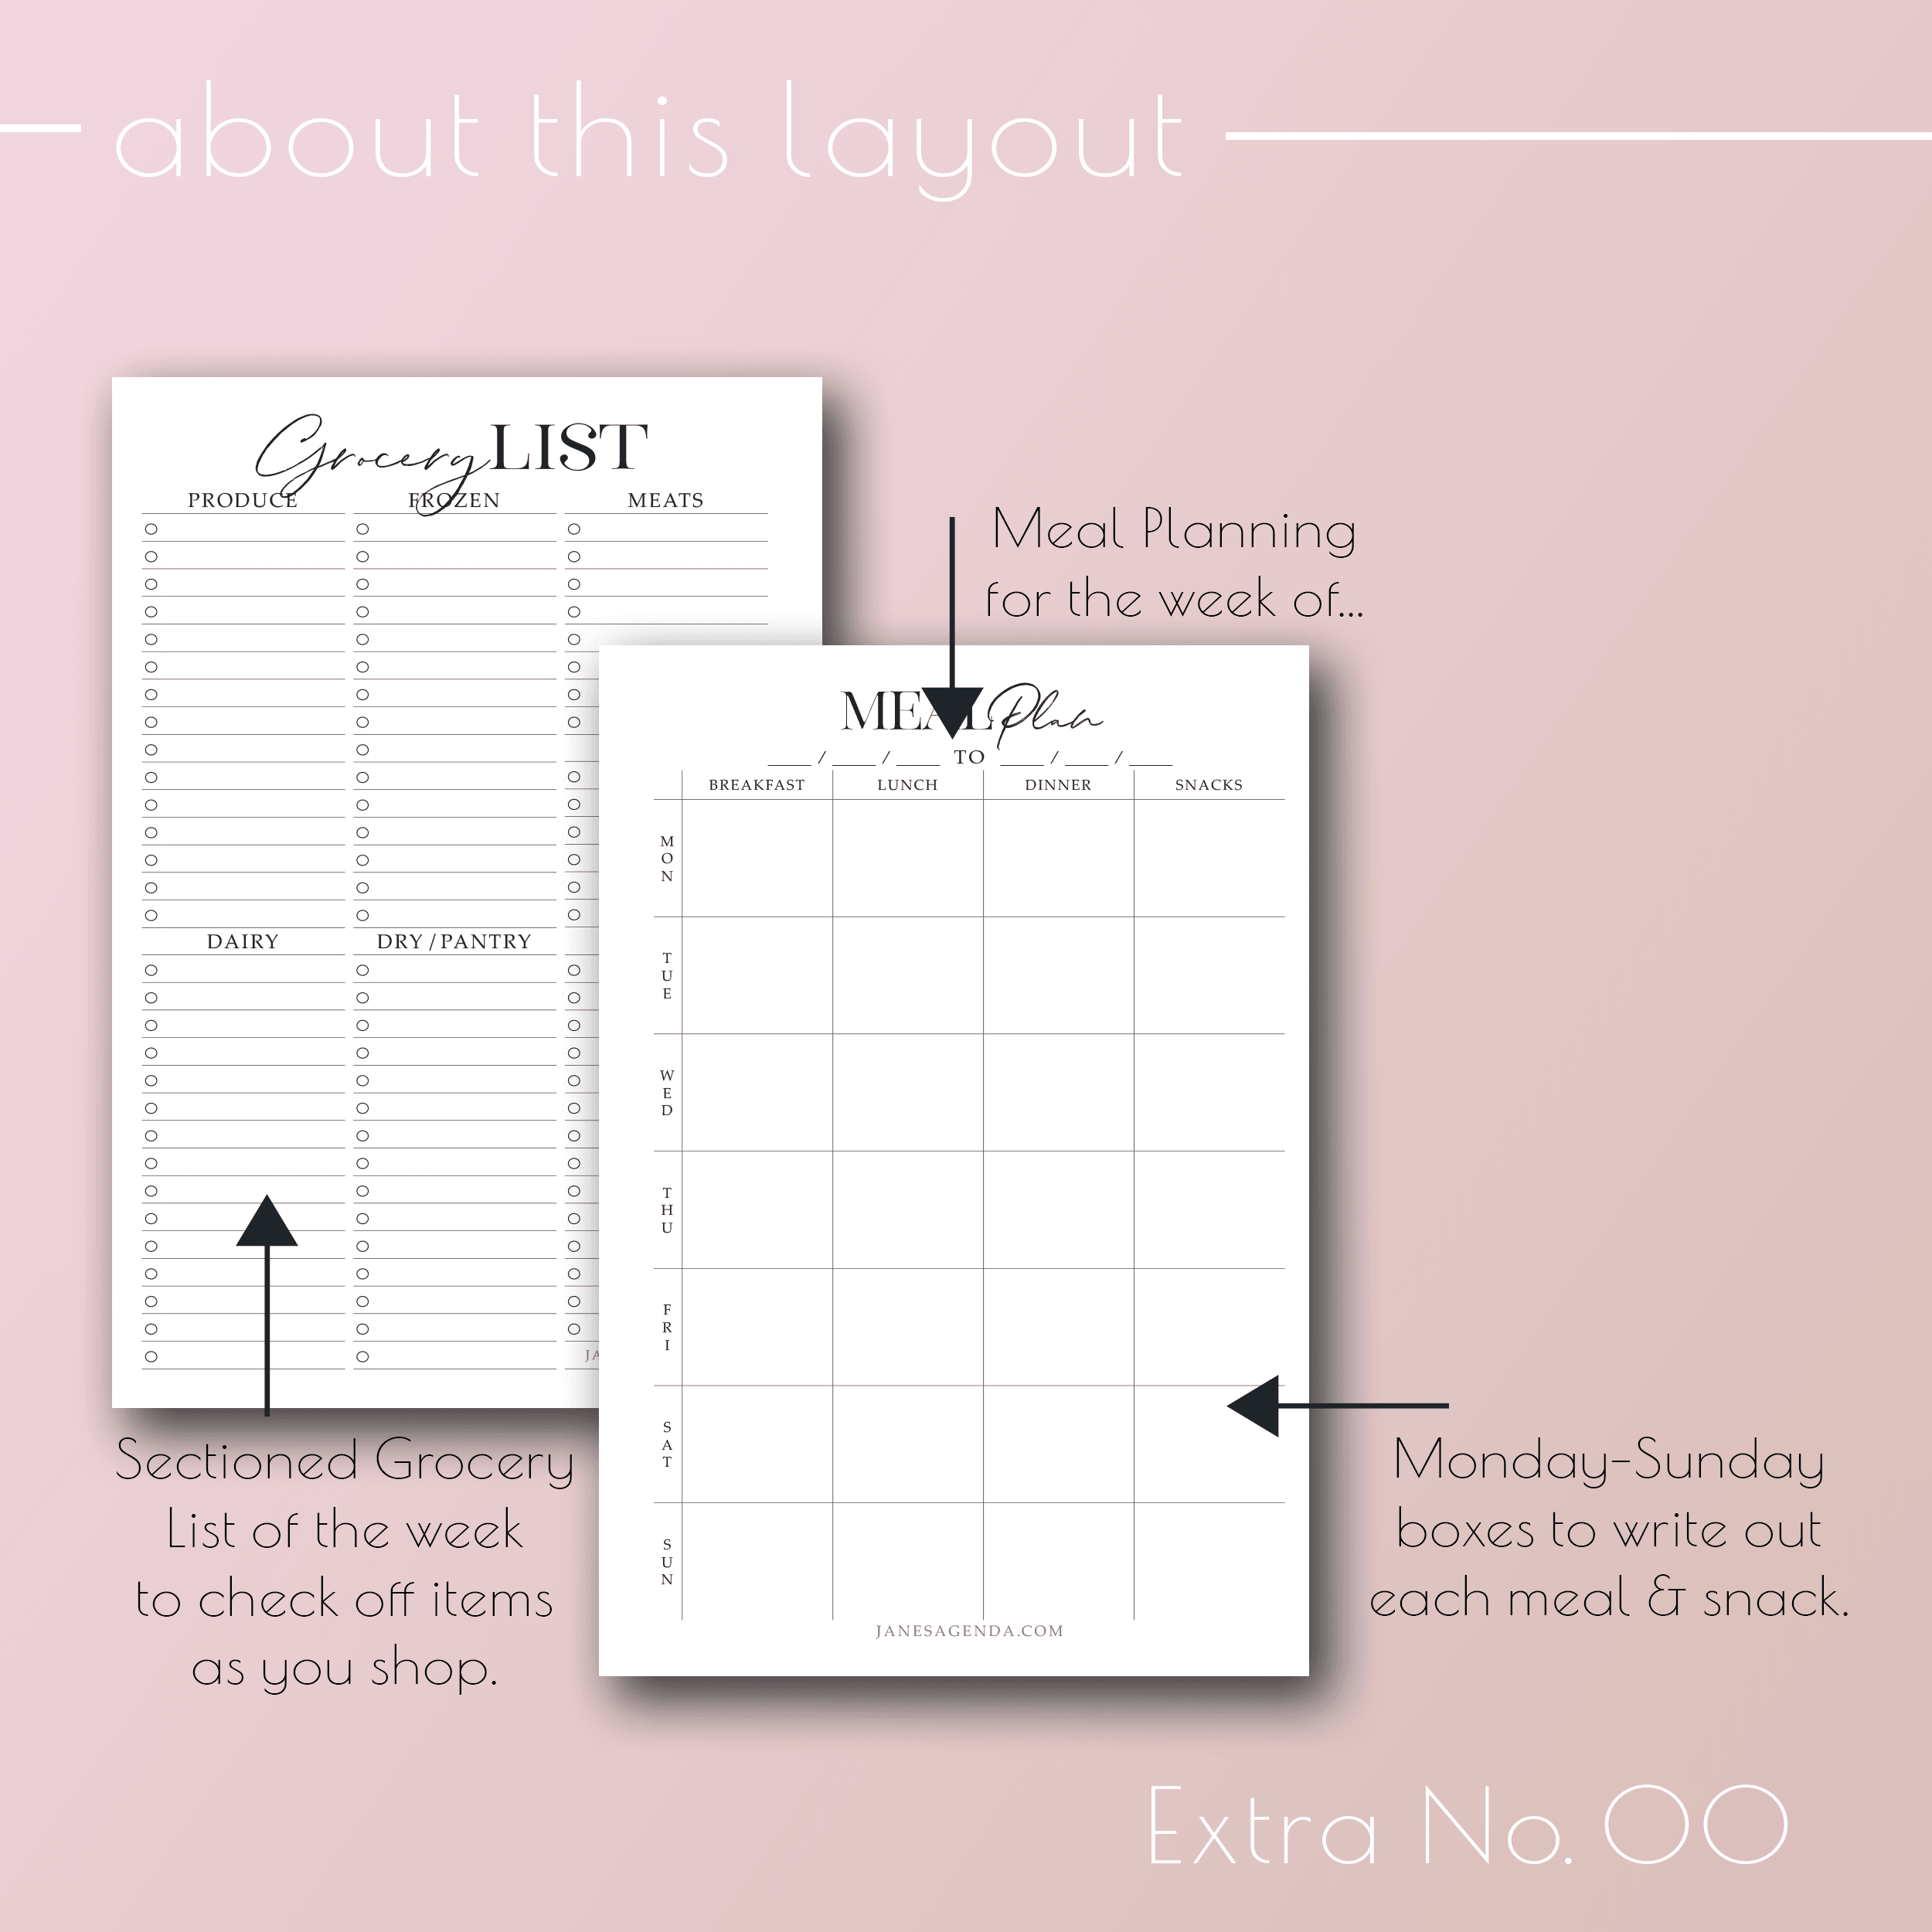 Planner Inserts Extra No. 00, Meal Planning planner refill pages, by jane's Agenda®.